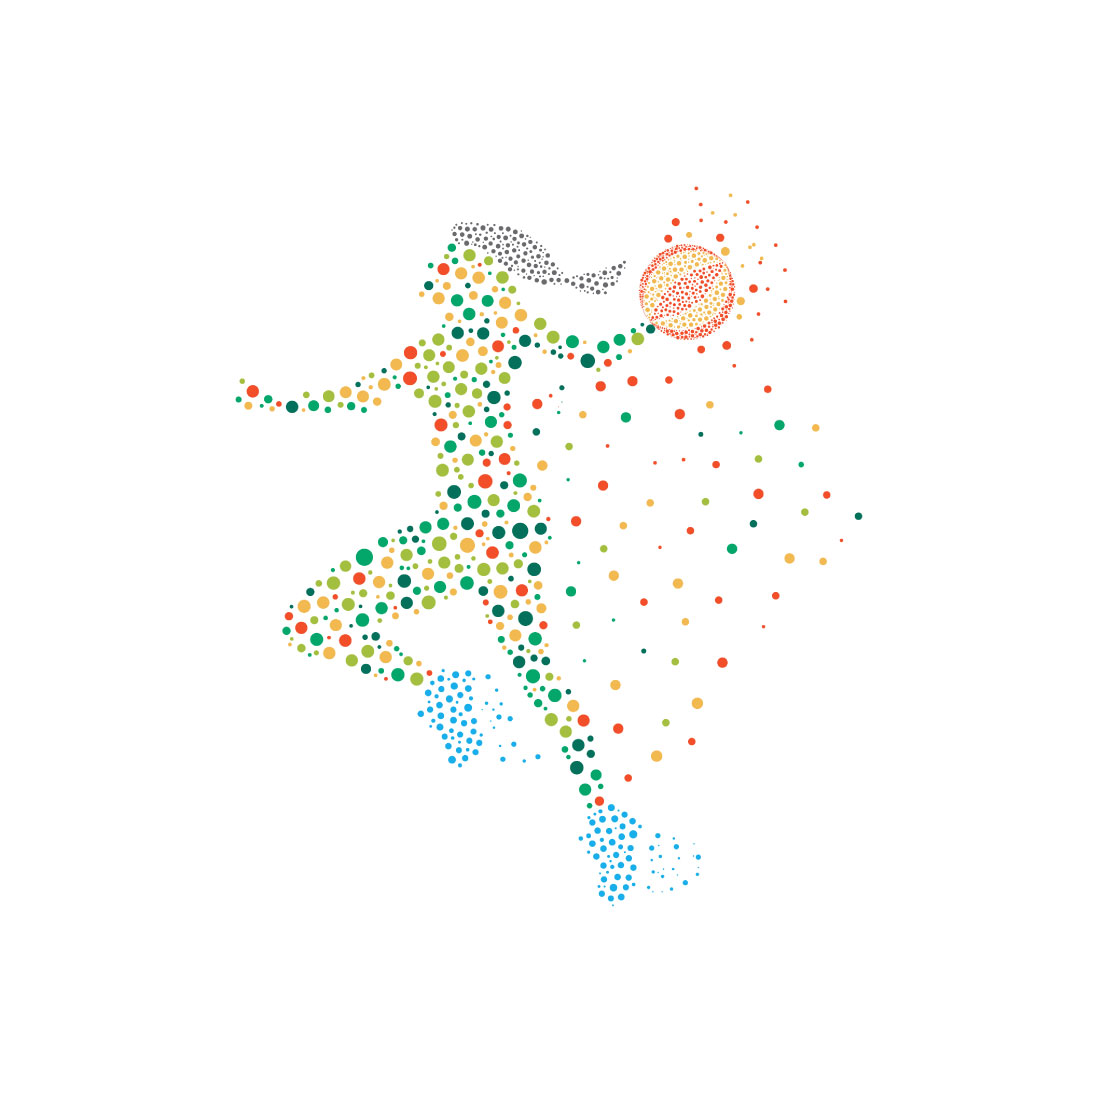 Basketball throwing is composed of colored dots, vector illustration cover image.